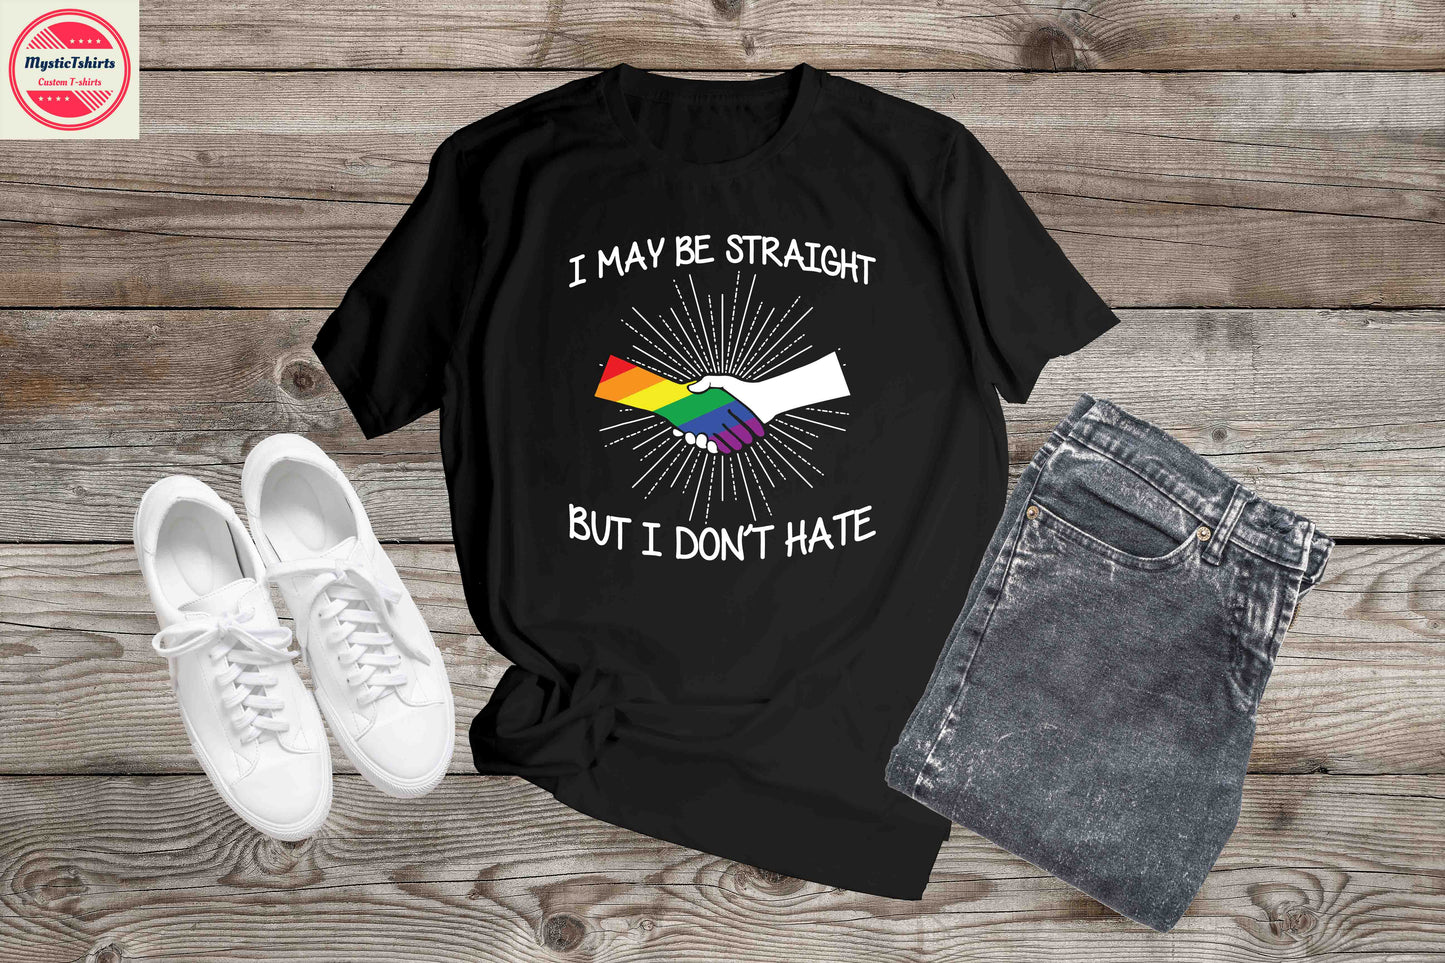 488. Pride, I may be straight but i don't hate, Custom Made Shirt, Personalized T-Shirt, Custom Text, Make Your Own Shirt, Custom Tee